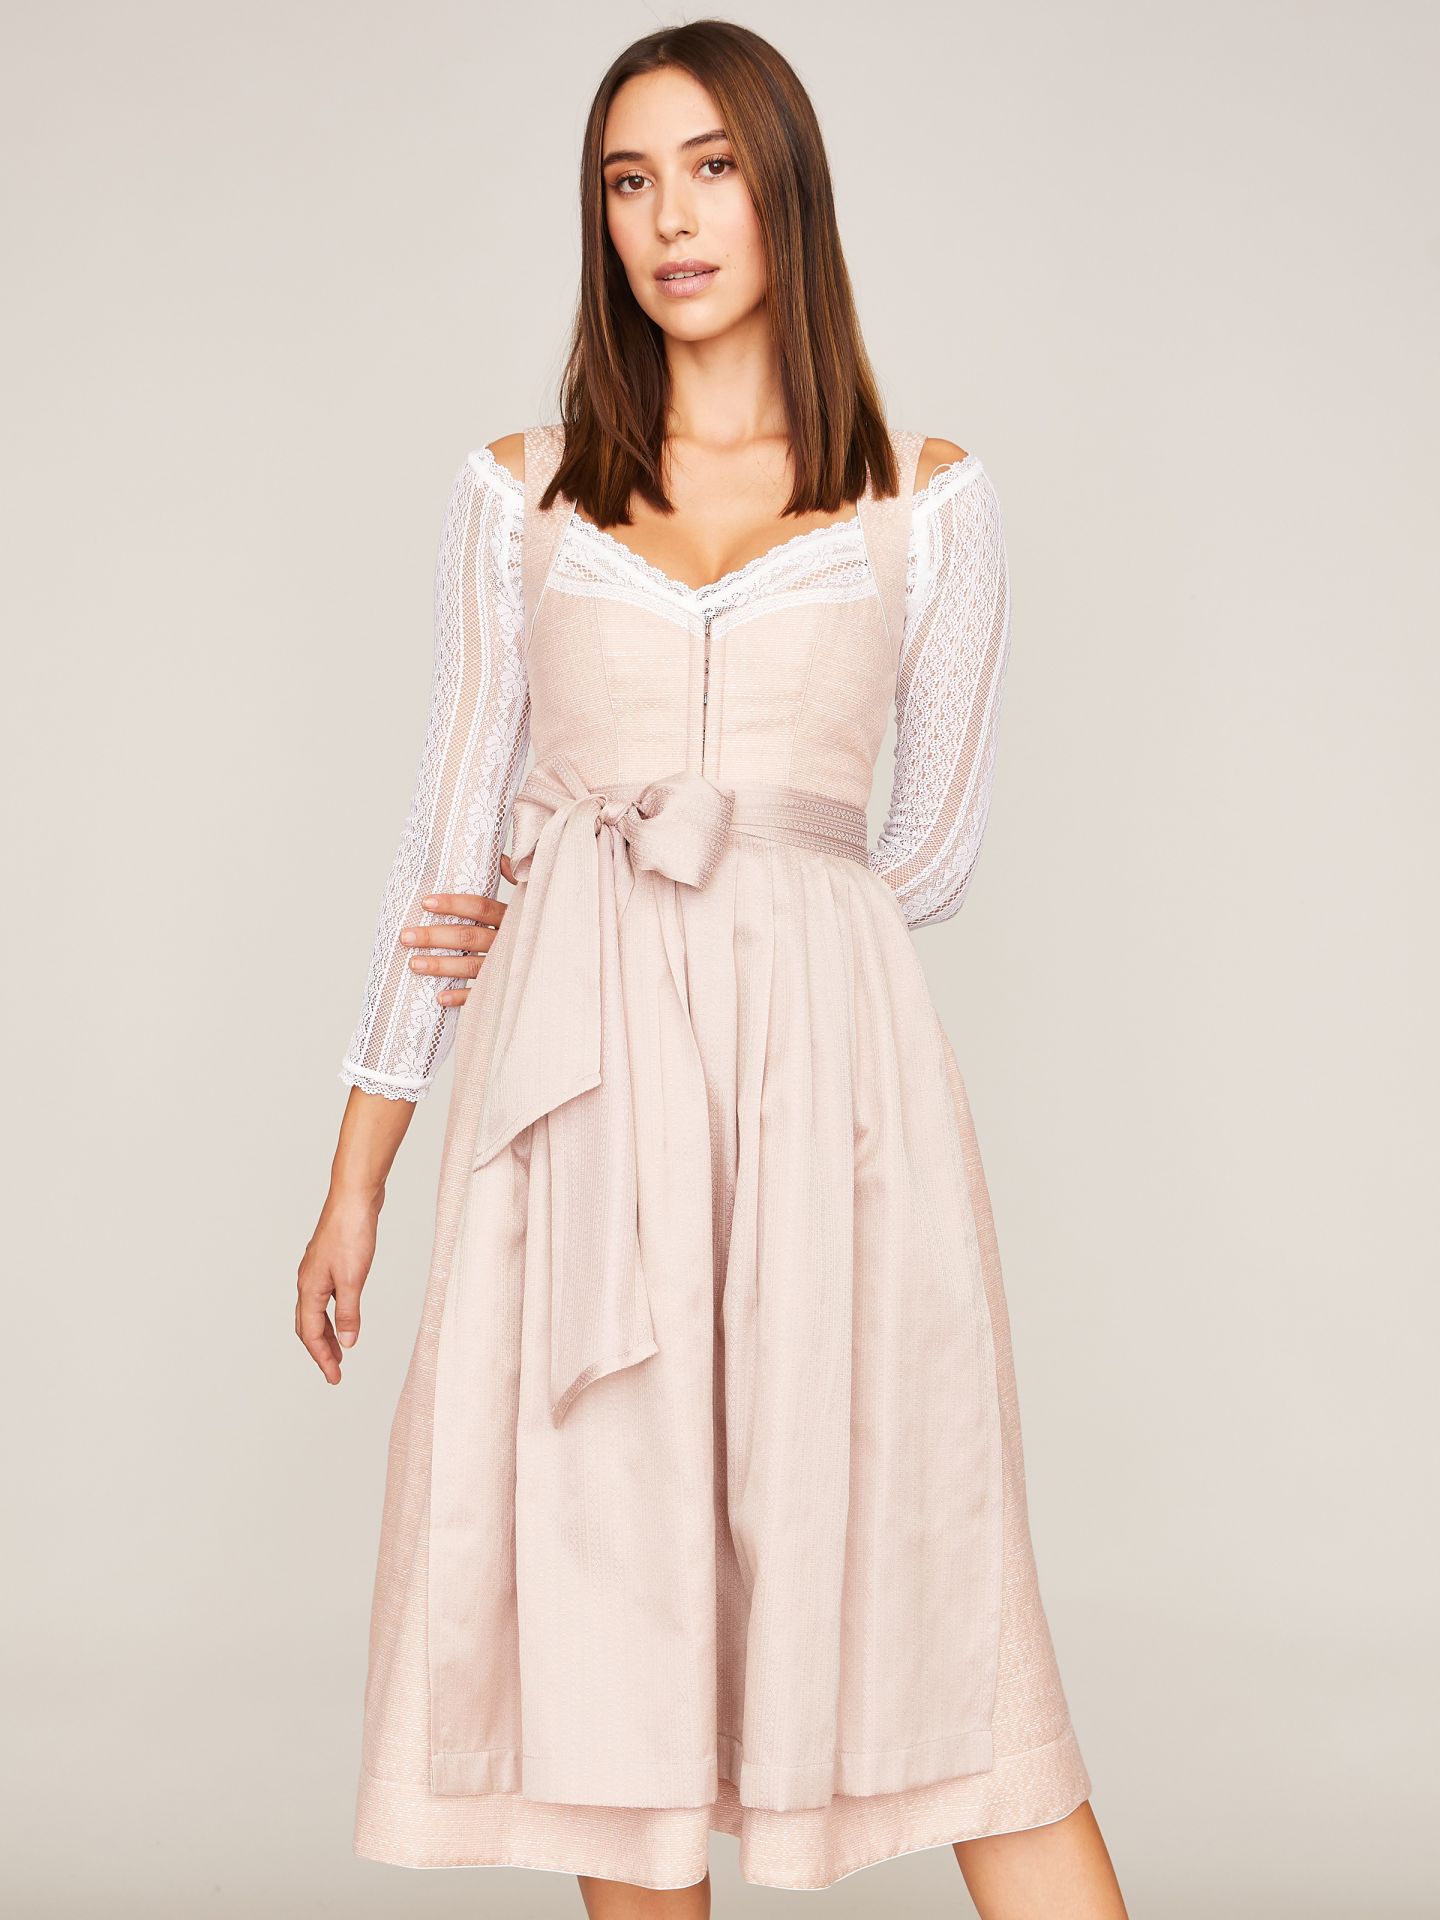 CocoVero Pastell-farbenes Dirndl in sanftem Apricot